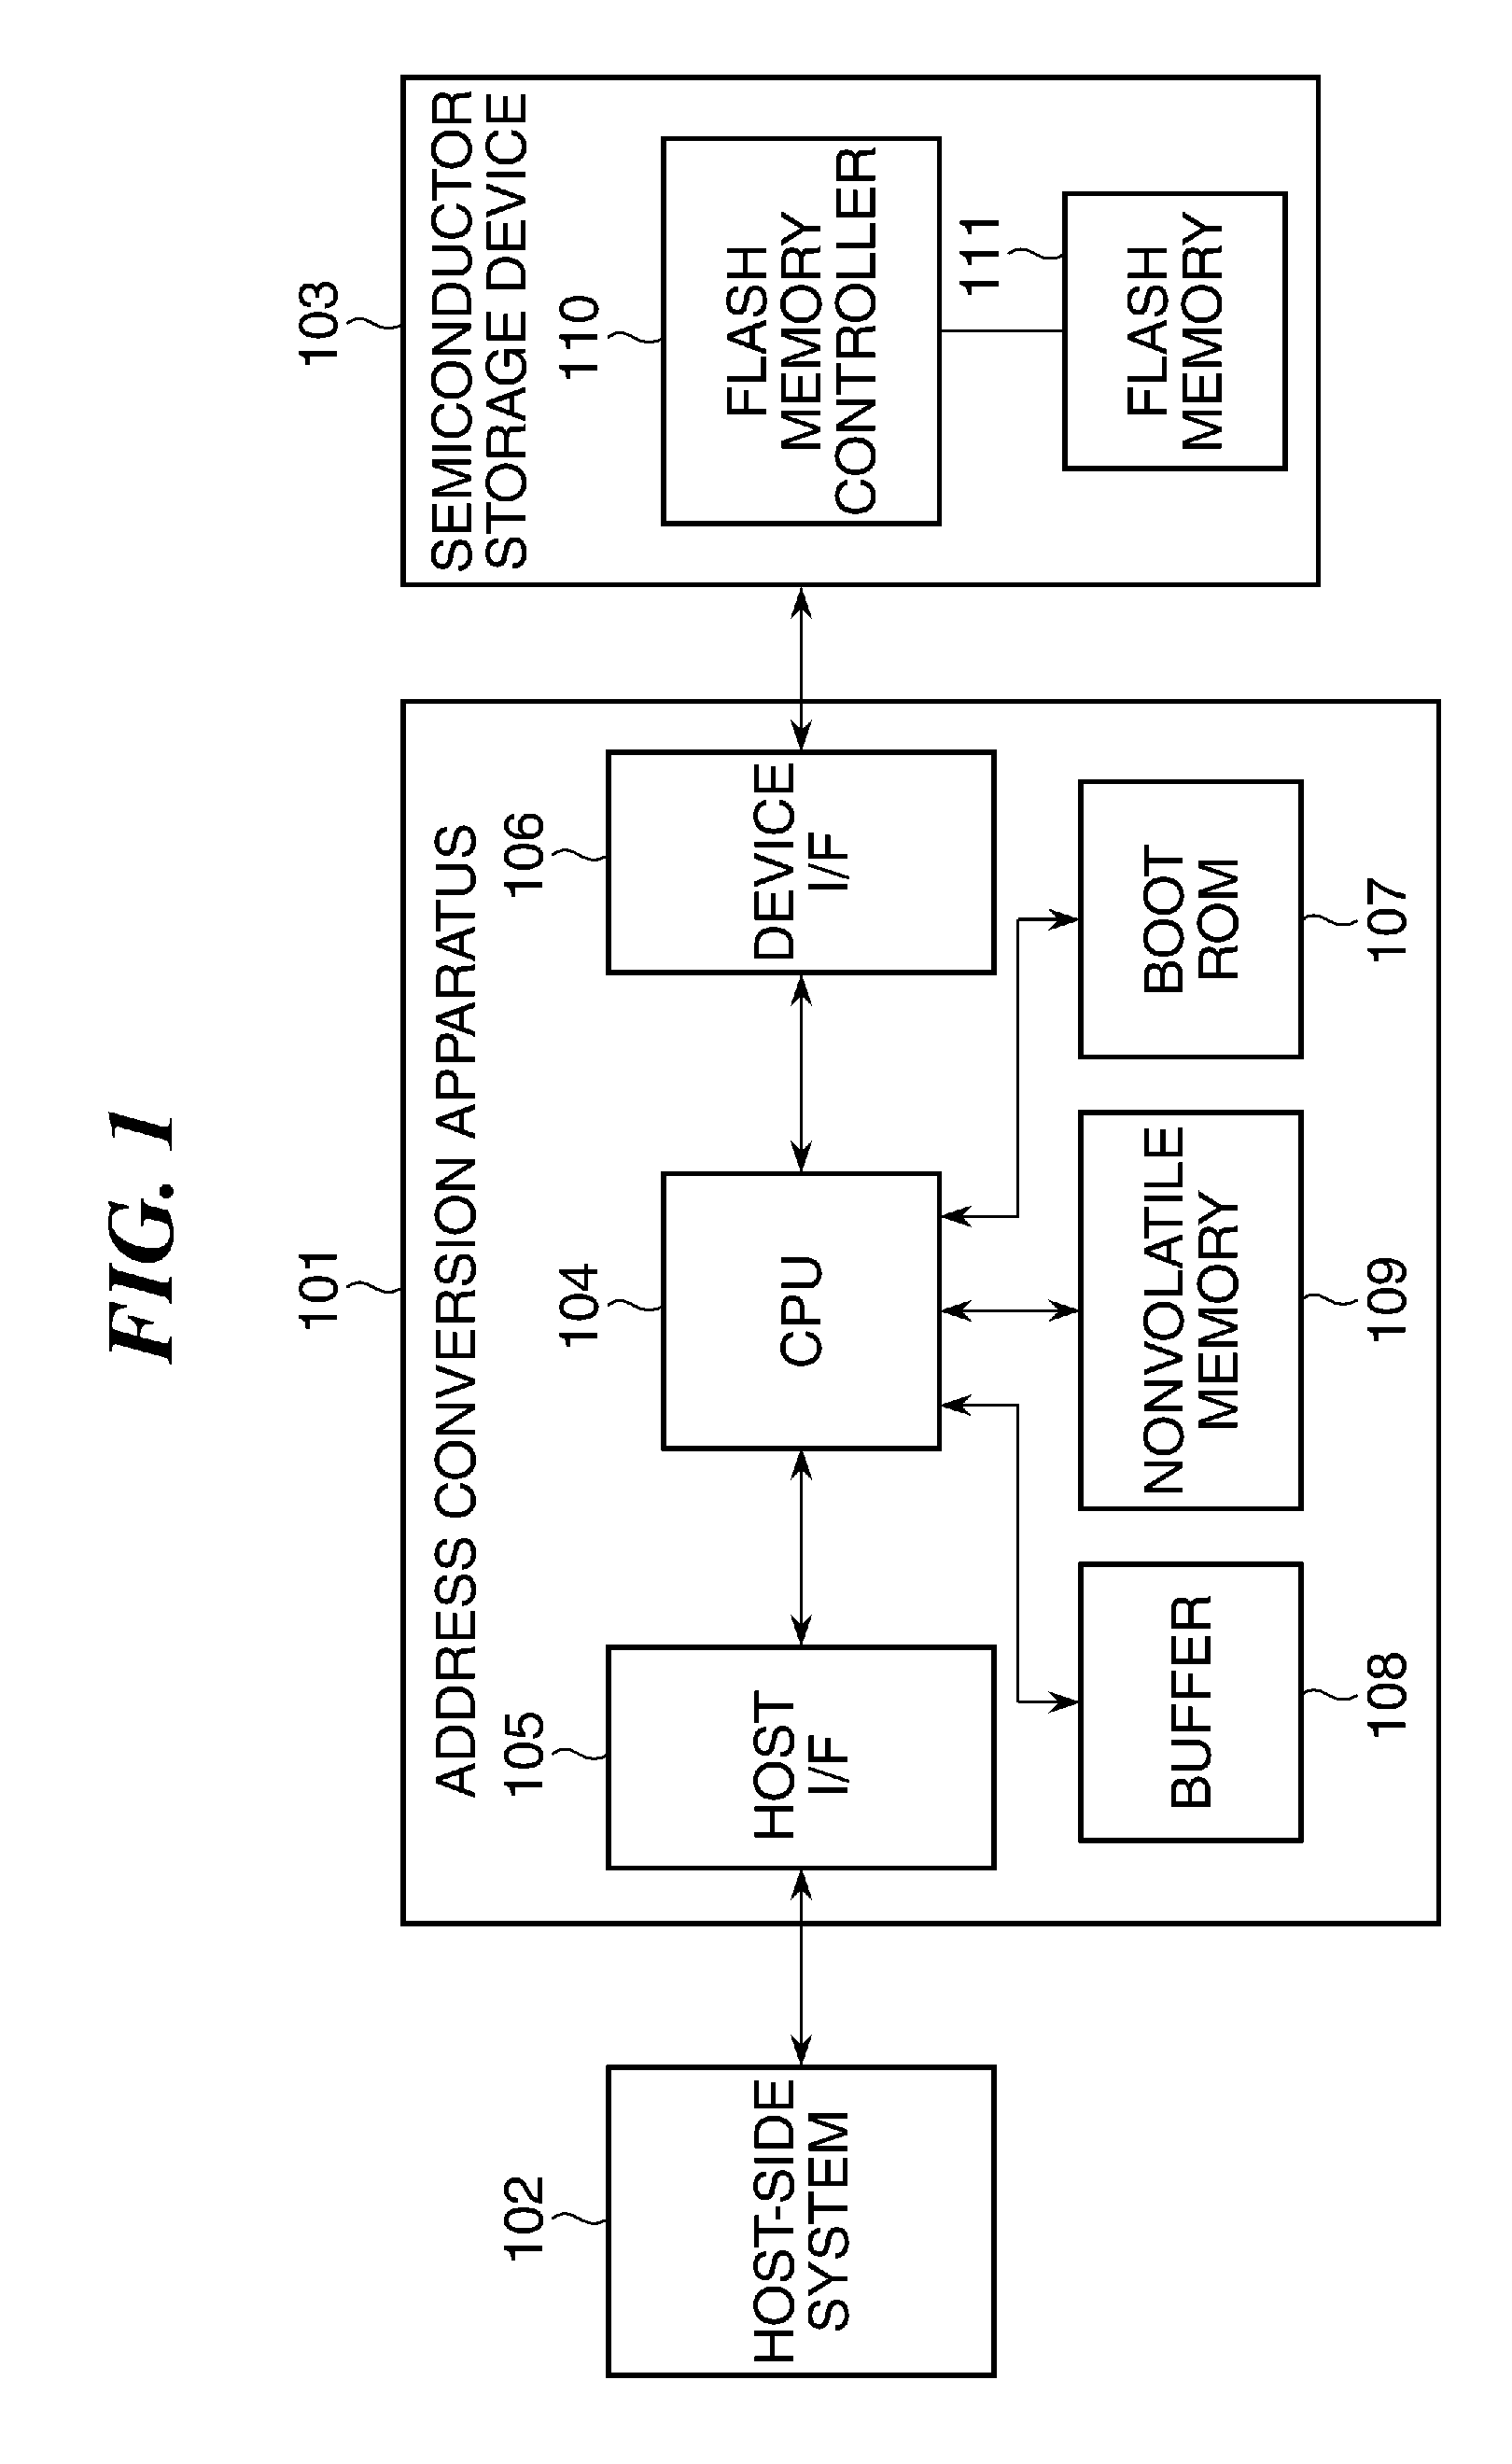 Storage control apparatus for controlling data writing and deletion to and from semiconductor storage device, and control method and storage medium therefor